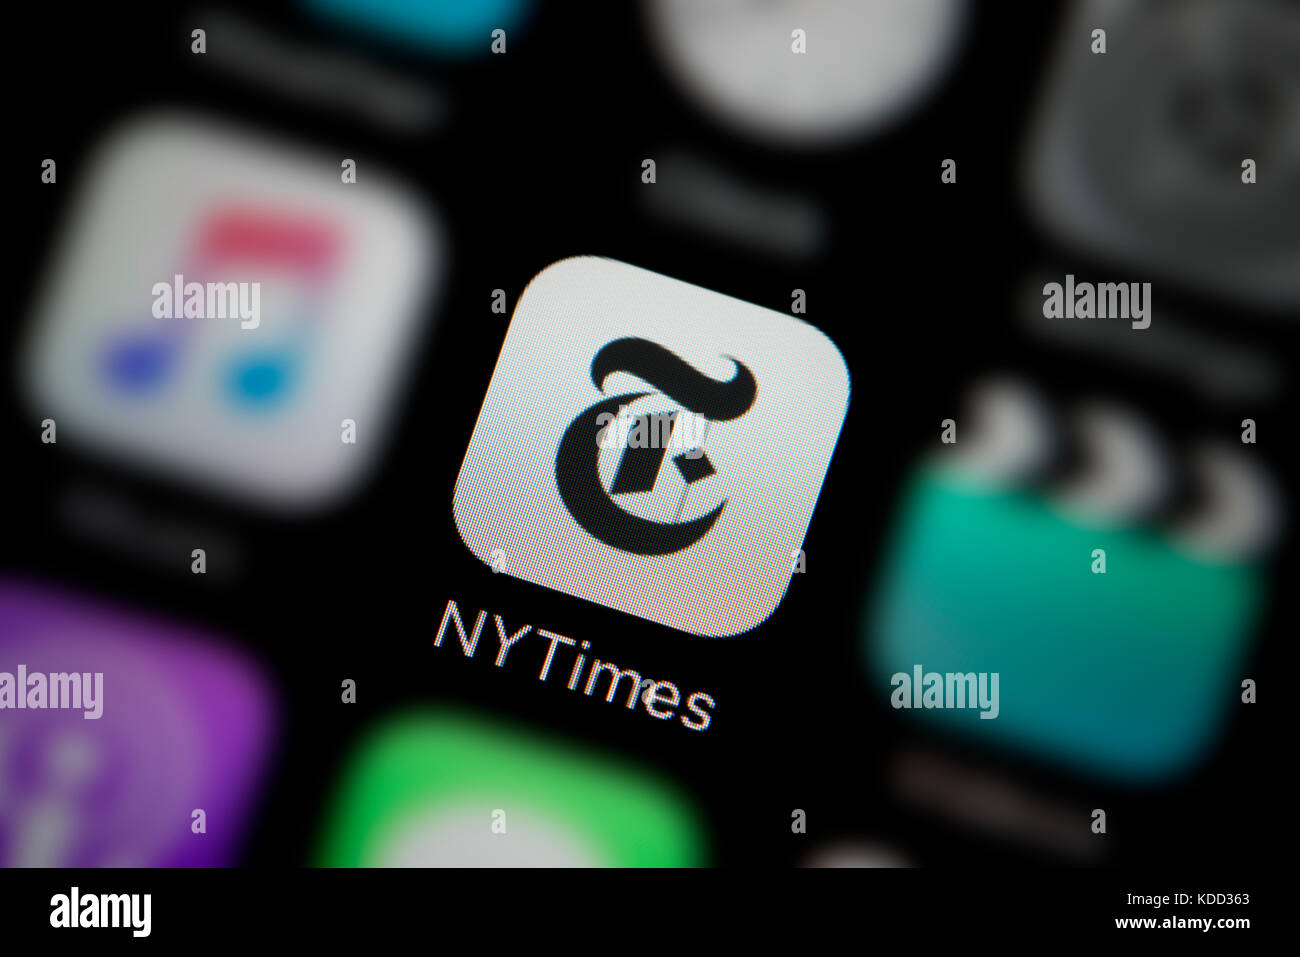 A close-up shot of the logo representing New York Times app icon, as seen on the screen of a smart phone (Editorial use only) Stock Photo